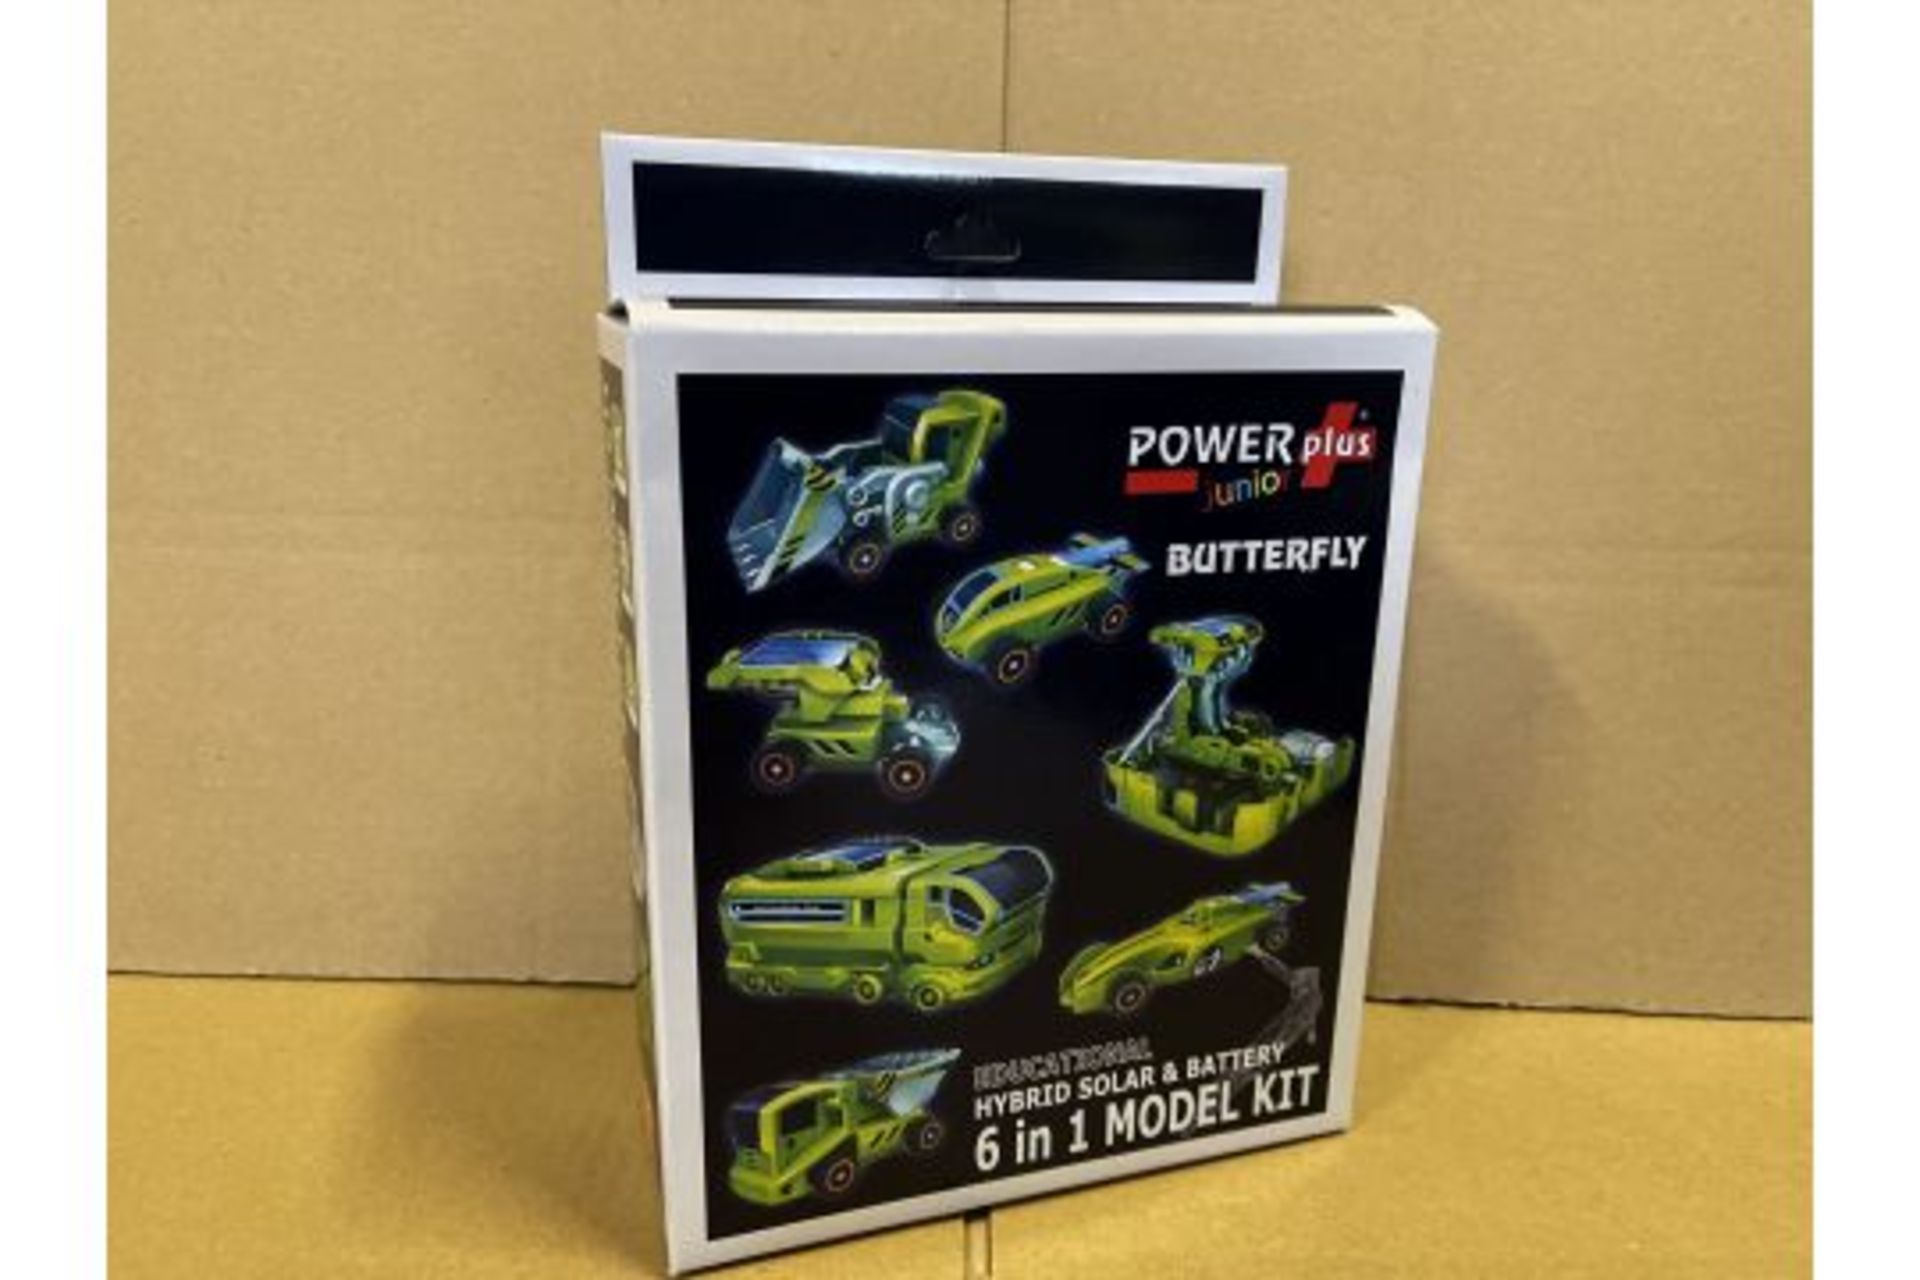 16 X BRAND NEW POWER PLUS JUNIOR EDUCATIONAL HYBRID SOLAR AND BATTERY 6 IN 1 MODEL KITS S1P